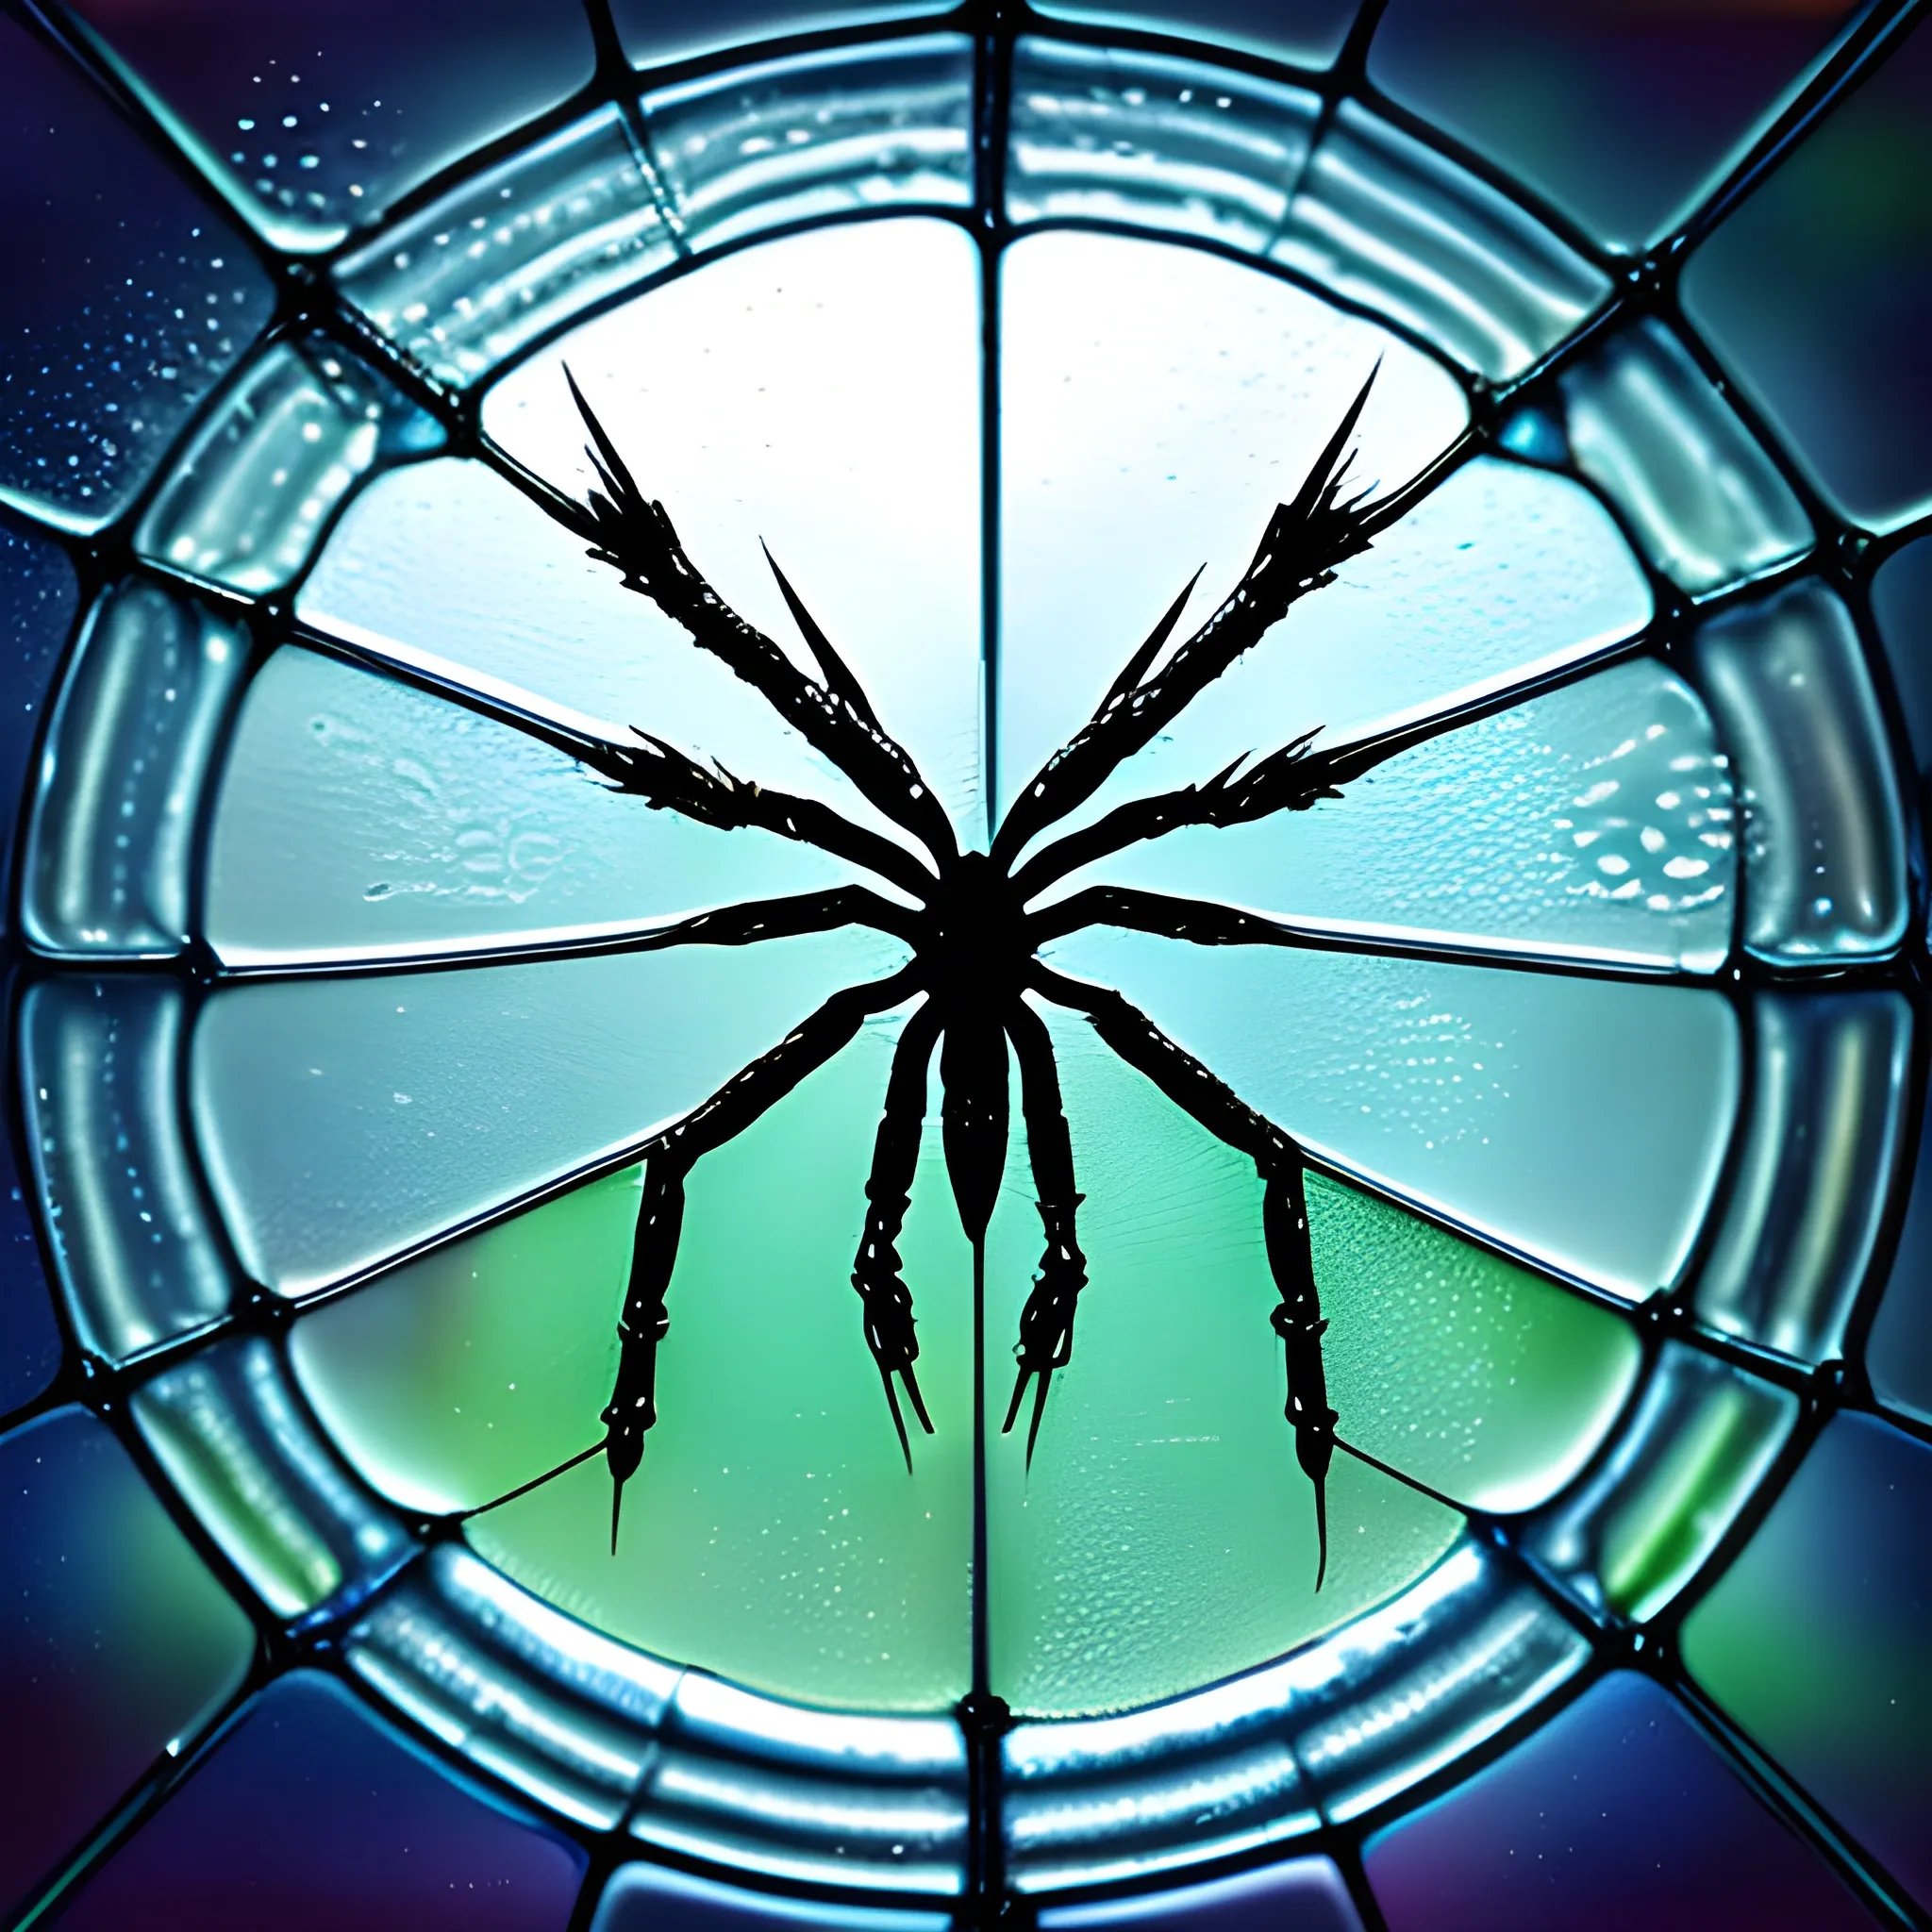 A photorealistic image of a glass window on a rainy, foggy day. The window is covered with water droplets. In the center, Spider with net shape is drawn  in a simple manner. The shape appears as if it is dripping water drops naturally, enhancing the realistic, natural feel of a rainy day. The background behind the glass shows the blurry, rainy scenery, contributing to the overall mood of the image The rainy and foggy background enhances the realistic feel of a rainy day, with the text clearly visible and centrally located on the window., Broken Glass effect, no background, stunning, something that even doesn't exist, mythical being, energy, molecular, textures, iridescent and luminescent scales, breathtaking beauty, pure perfection, divine presence, unforgettable, impressive, breathtaking beauty, Volumetric light, auras, rays, vivid colors reflects